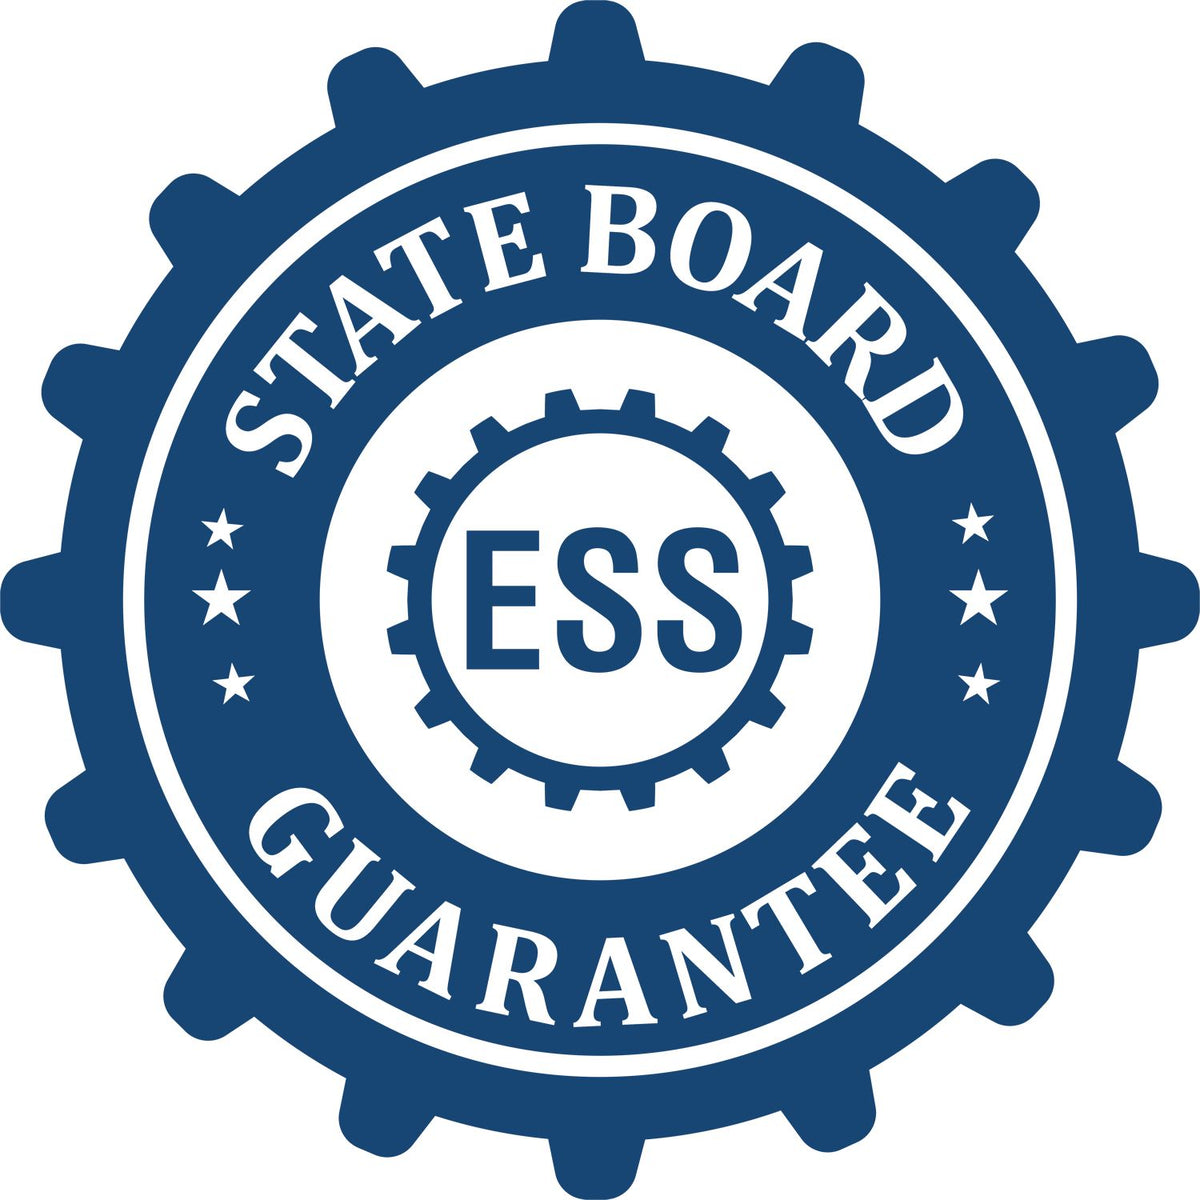 An emblem in a gear shape illustrating a state board guarantee for the Handheld Massachusetts Professional Geologist Embosser